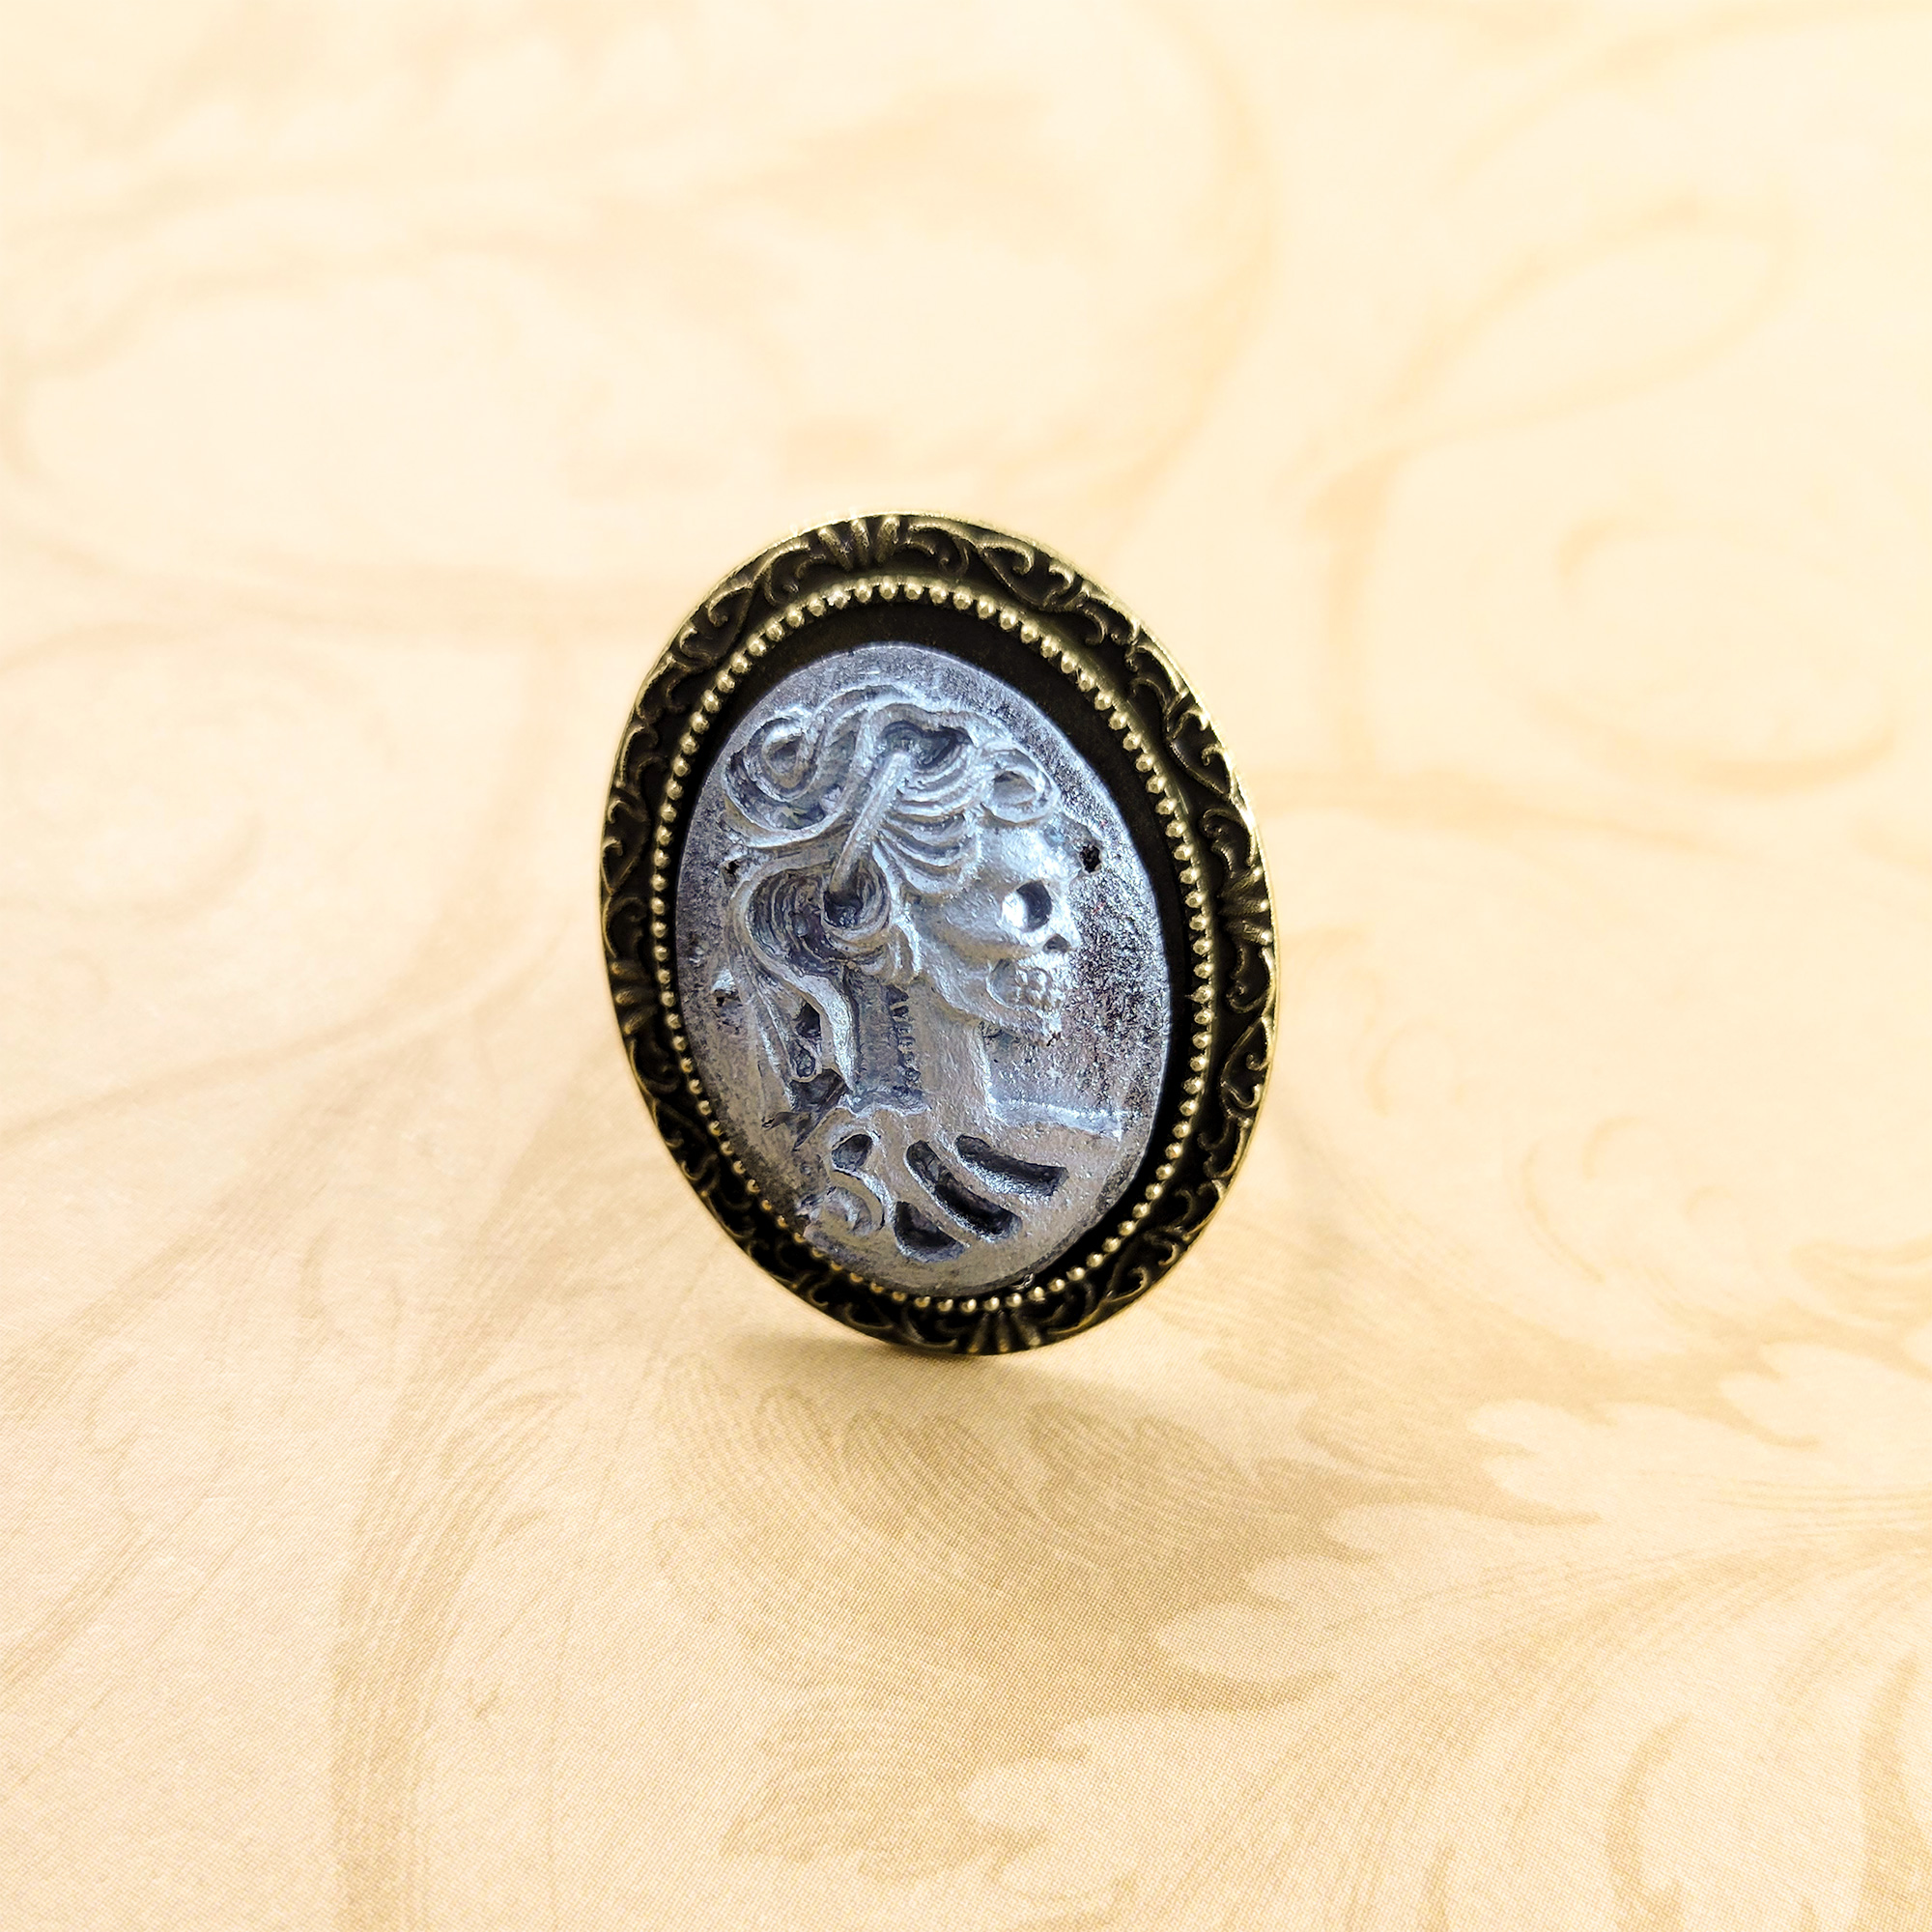 Portrait of a Skeletal Lady Cameo Ring in Silver by Wilde Designs